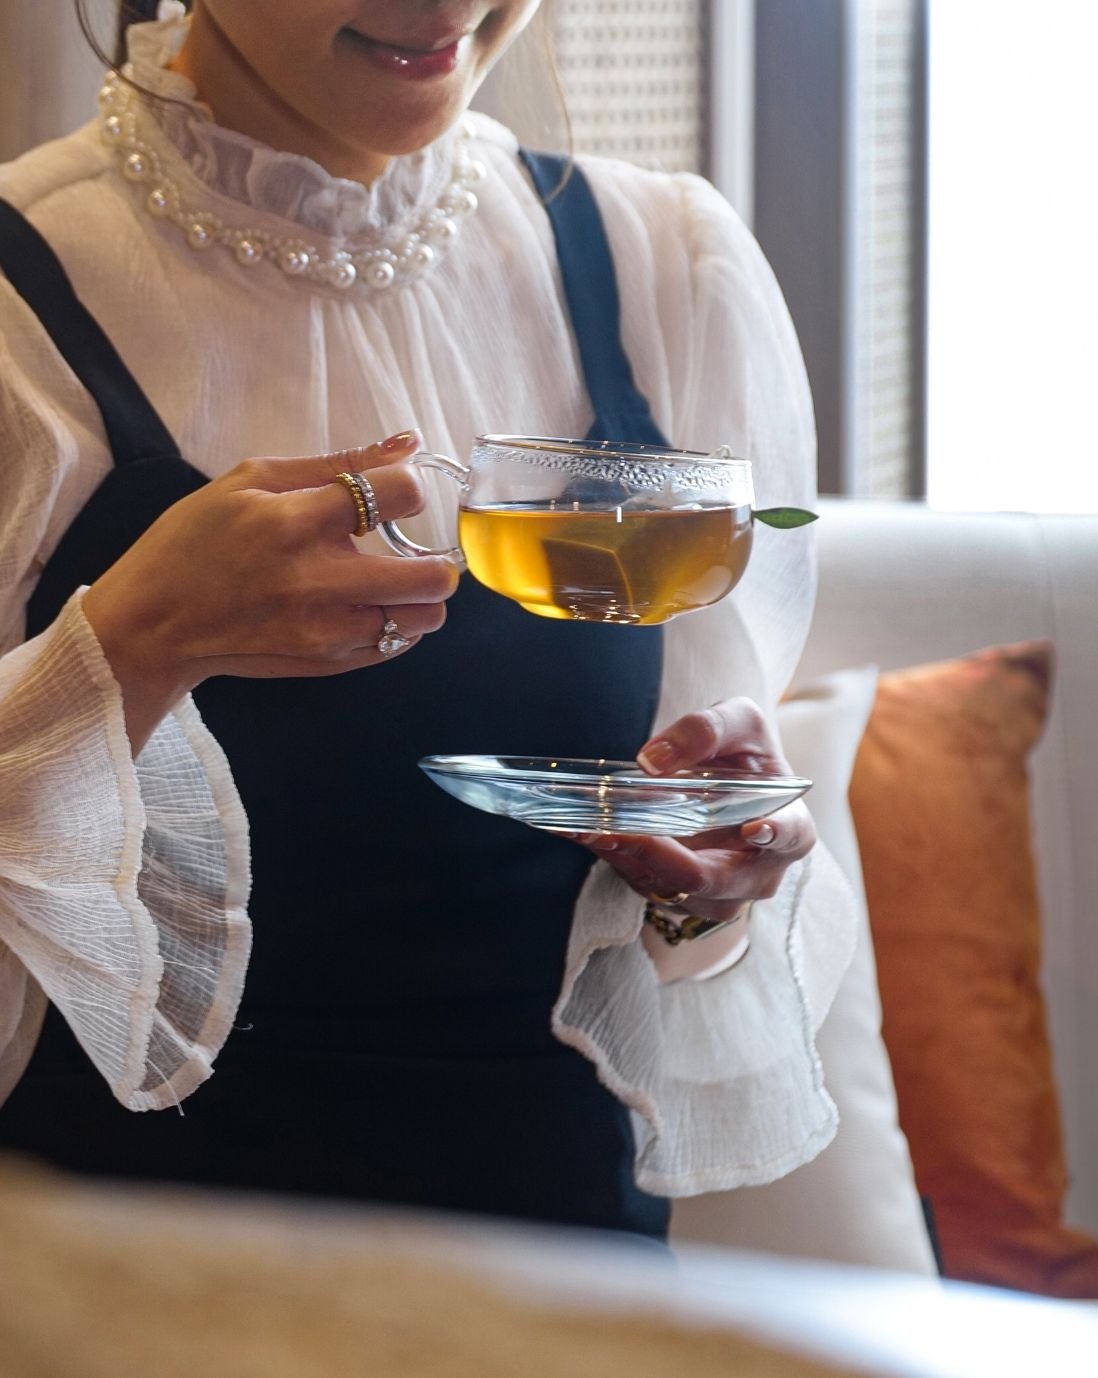 A woman in white blouse and black dress sitting on couch and drinking tea from transparent tea cup in one hand and saucer in the other